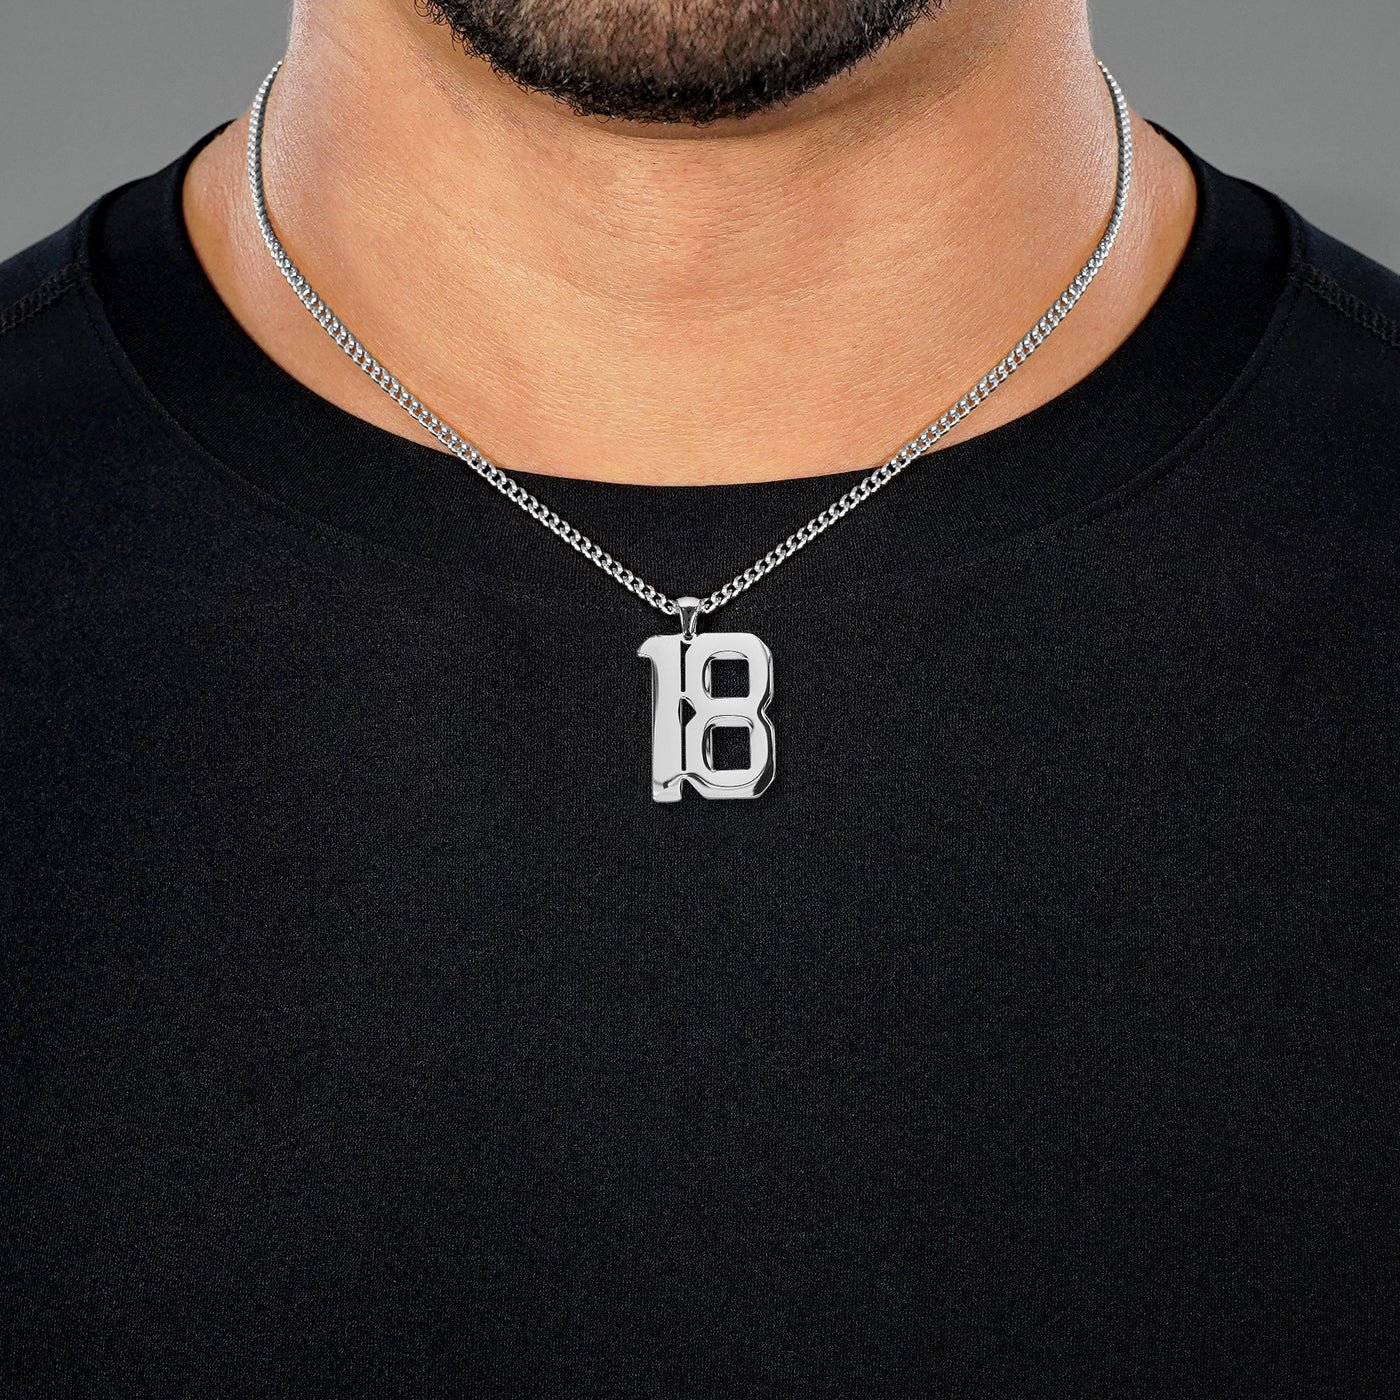 18 Number Pendant with Chain Necklace - Stainless Steel